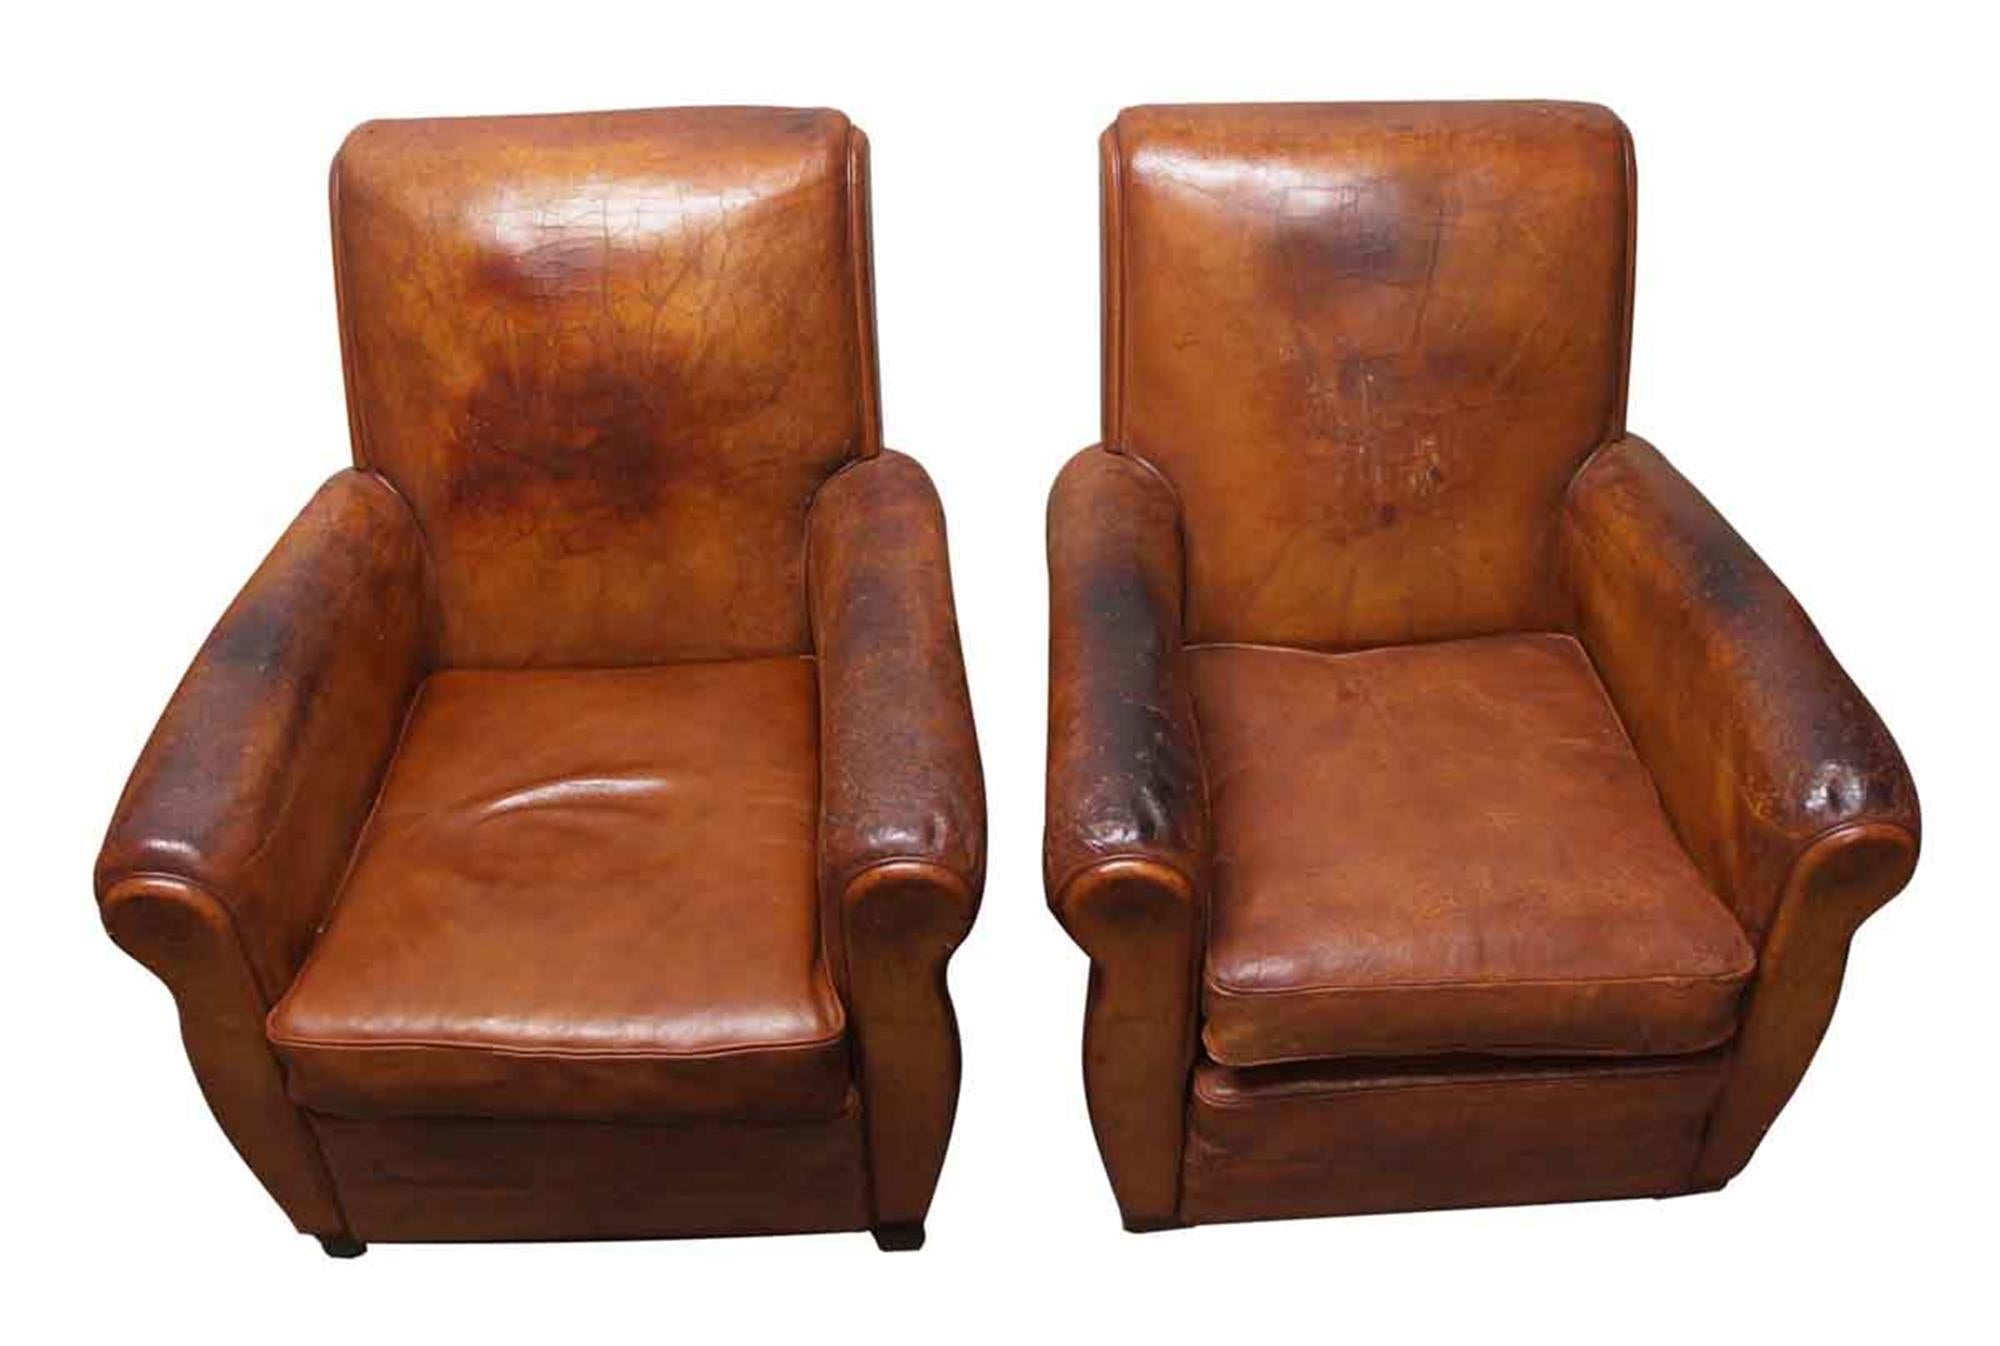 1970s pair of brown leather club chairs from France. They have general wear and tear from age and use. Priced as a pair. This can be seen at our 302 Bowery location in Manhattan.